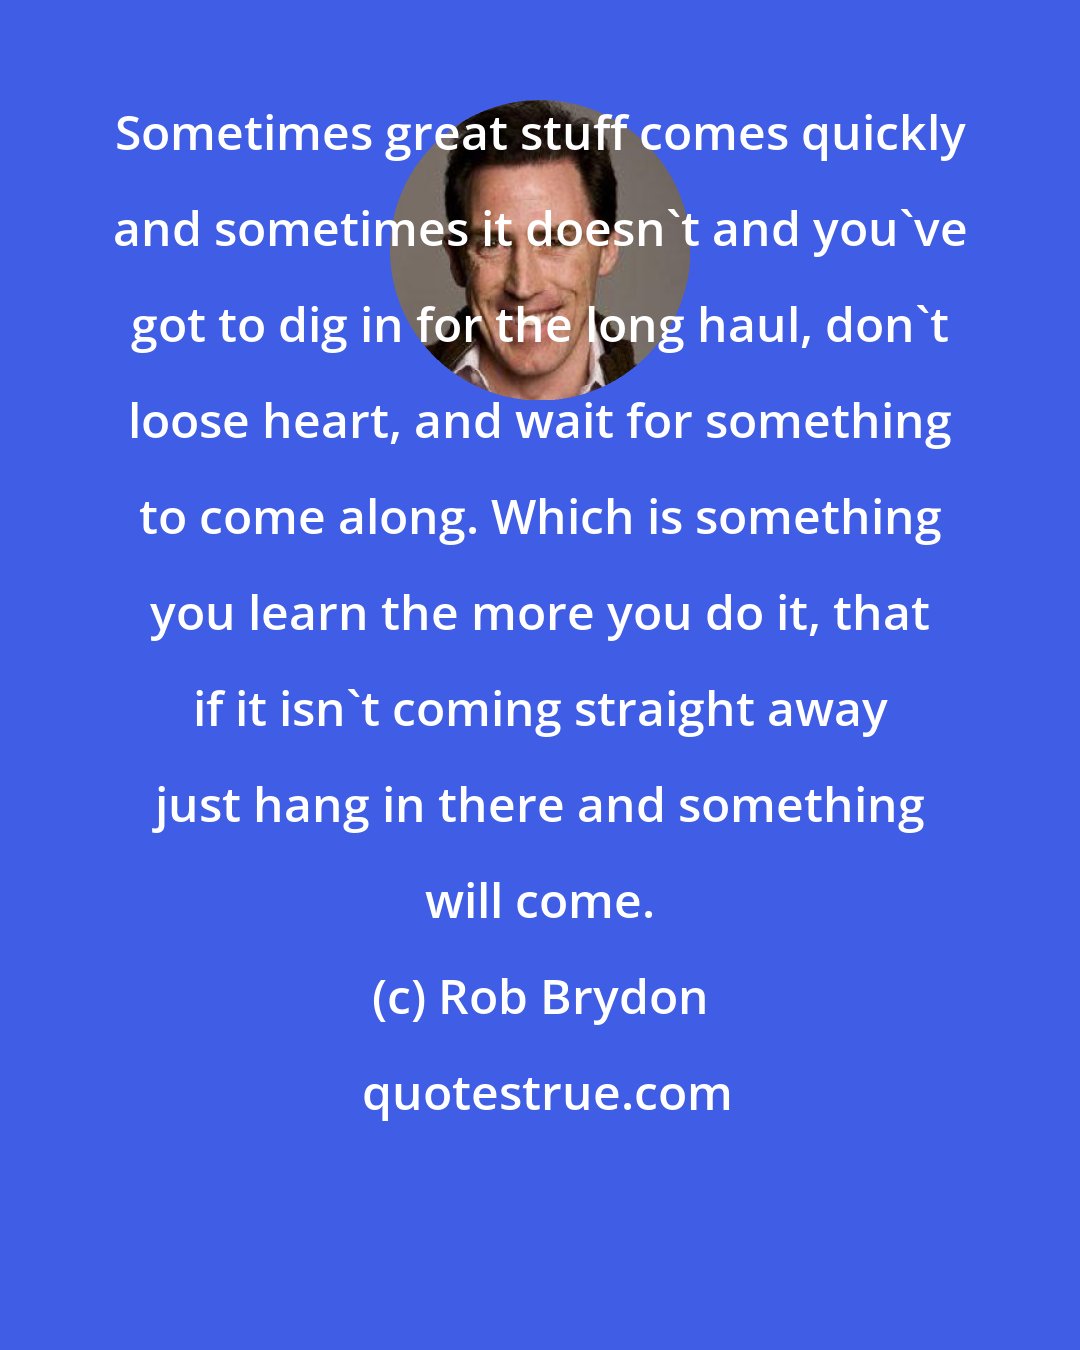 Rob Brydon: Sometimes great stuff comes quickly and sometimes it doesn't and you've got to dig in for the long haul, don't loose heart, and wait for something to come along. Which is something you learn the more you do it, that if it isn't coming straight away just hang in there and something will come.